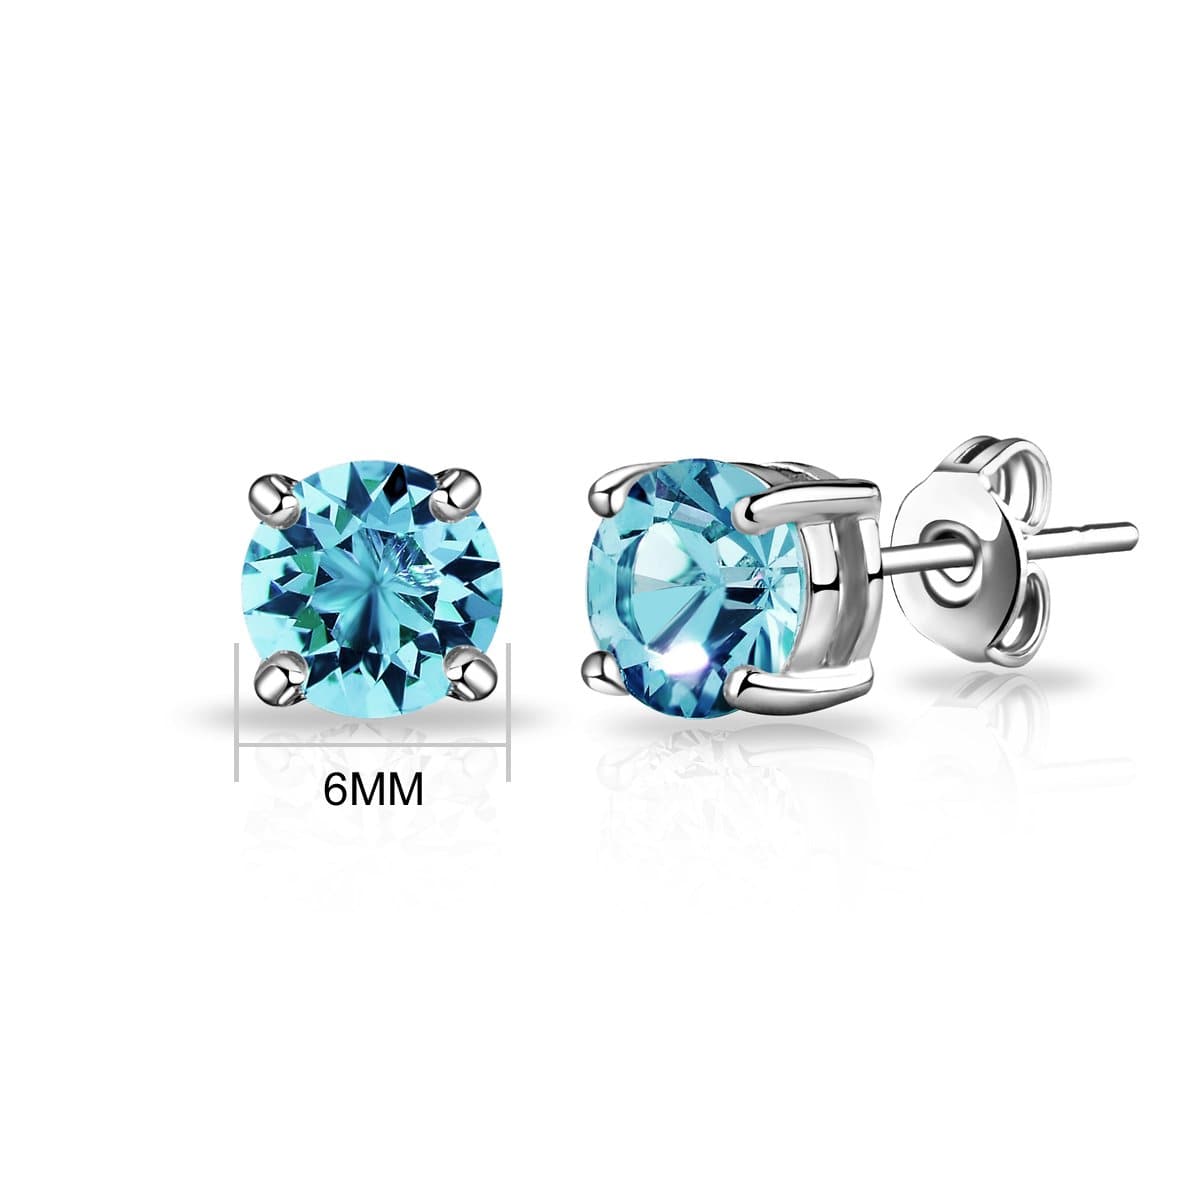 March (Aquamarine) Birthstone Earrings Created with Zircondia® Crystals